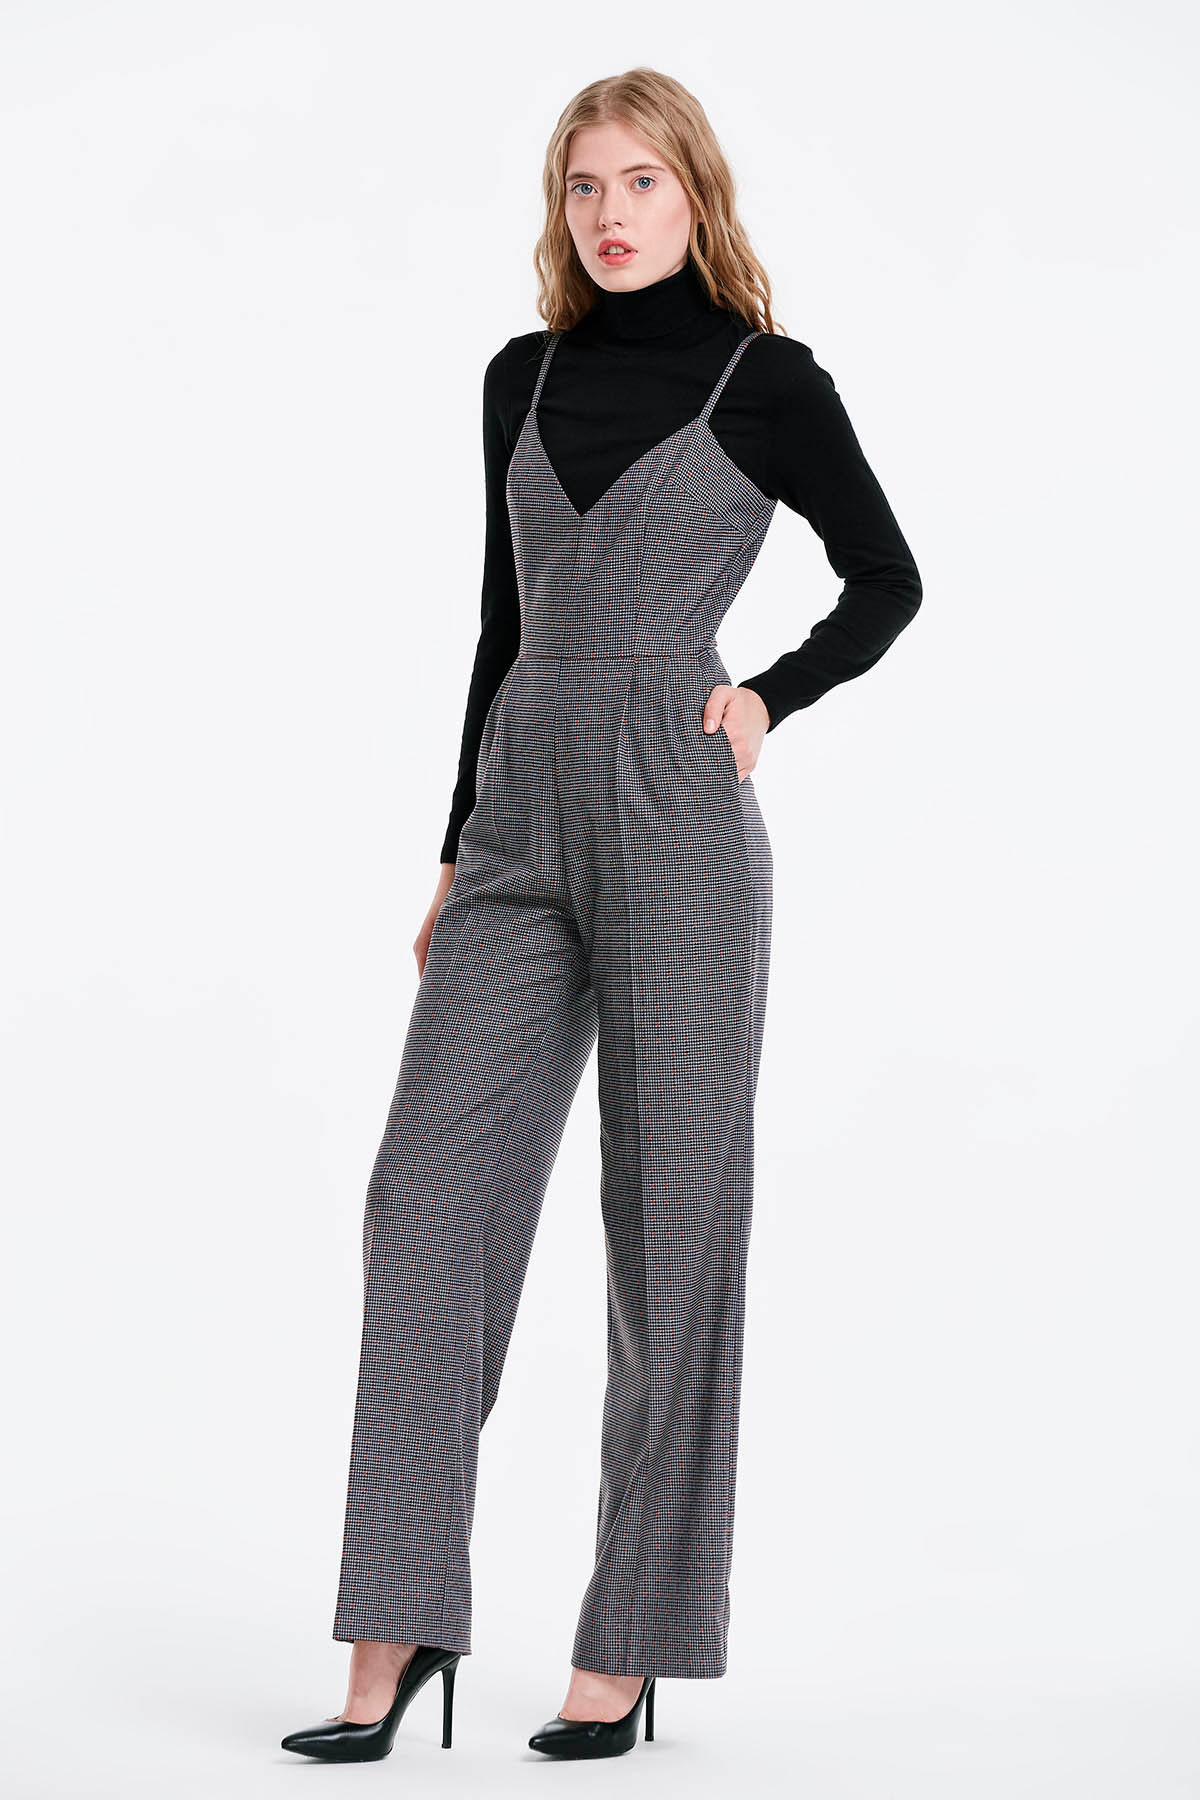 Grey jumpsuit with a houndstooth print, photo 4